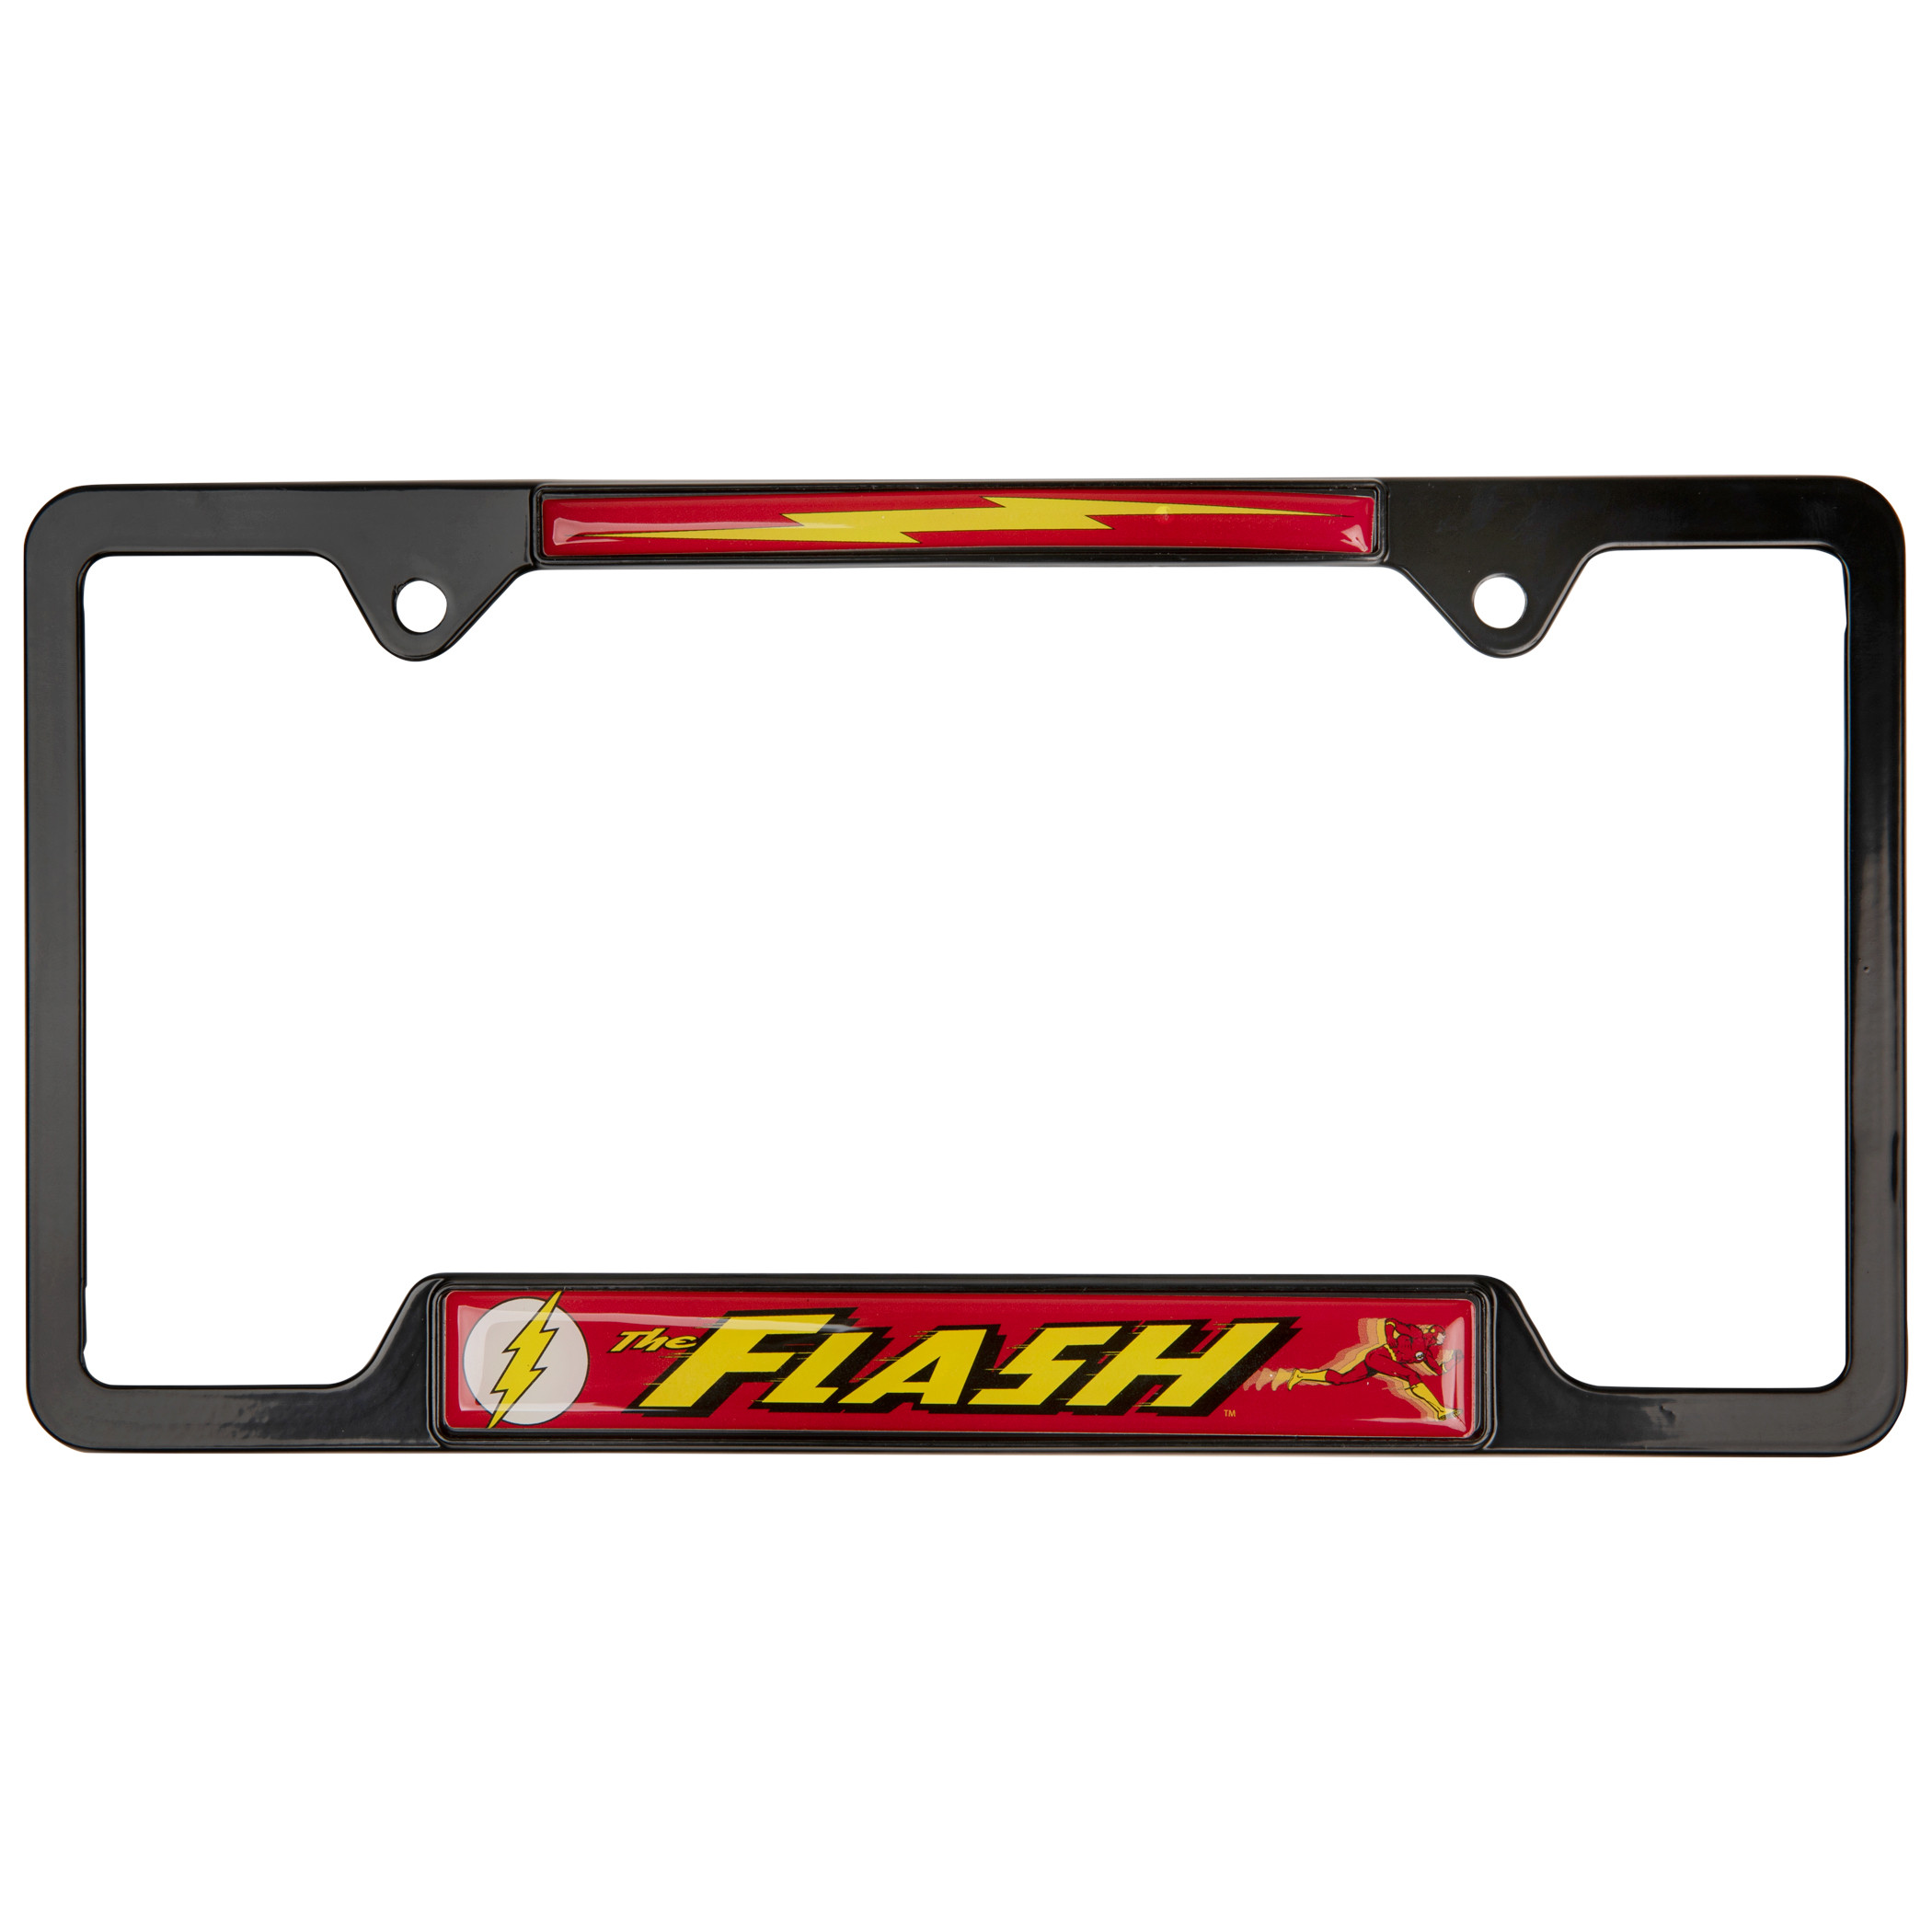 The Flash Open Black License Plate Frame by Elektroplate